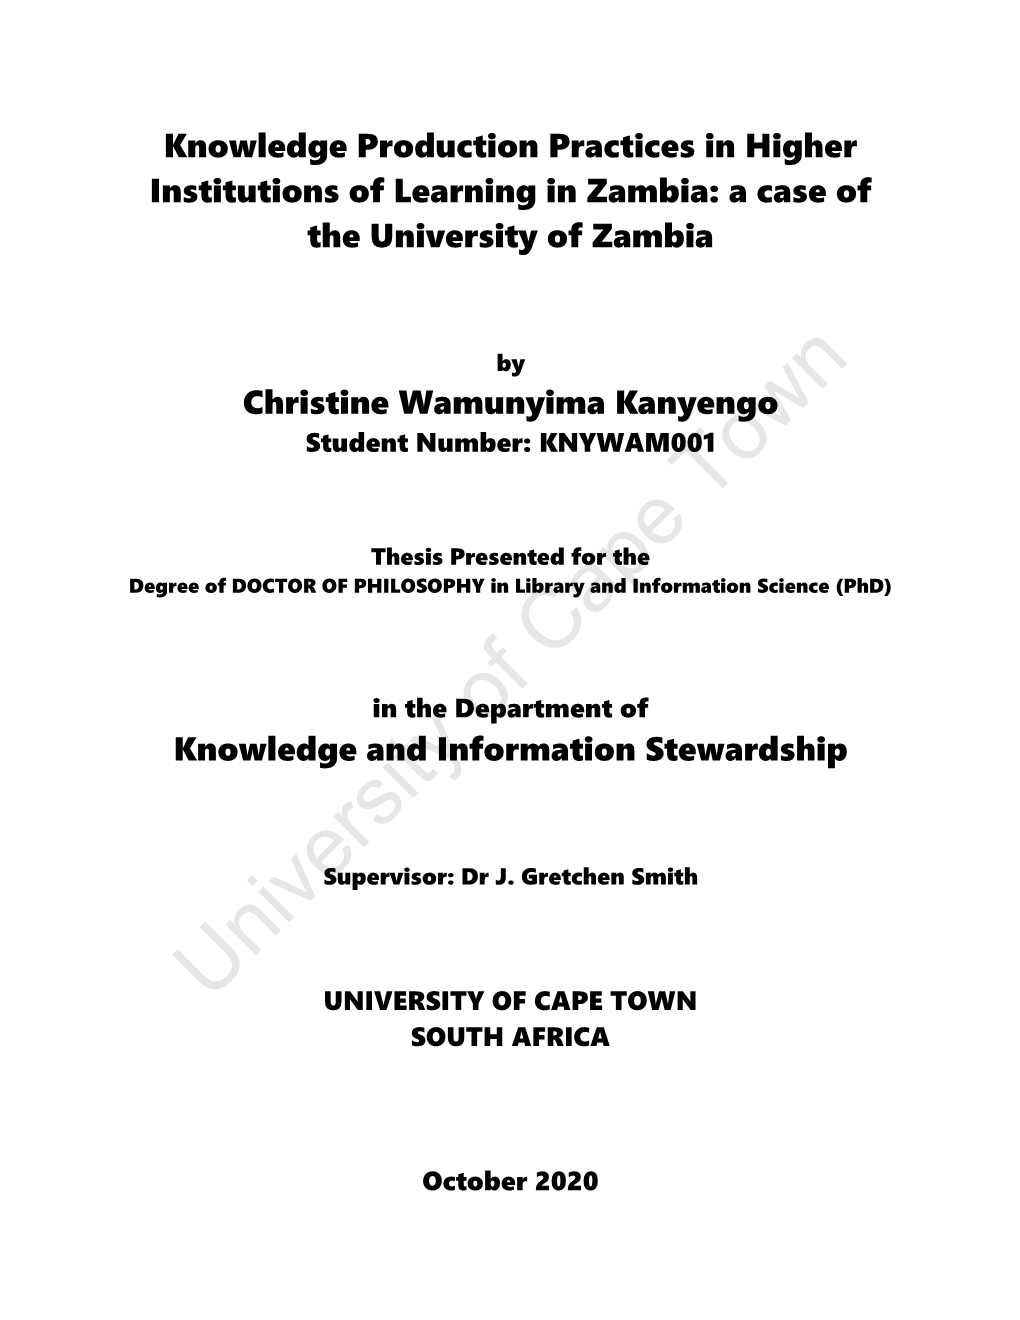 Knowledge Production Practices in Higher Institutions of Learning in Zambia: a Case of the University of Zambia